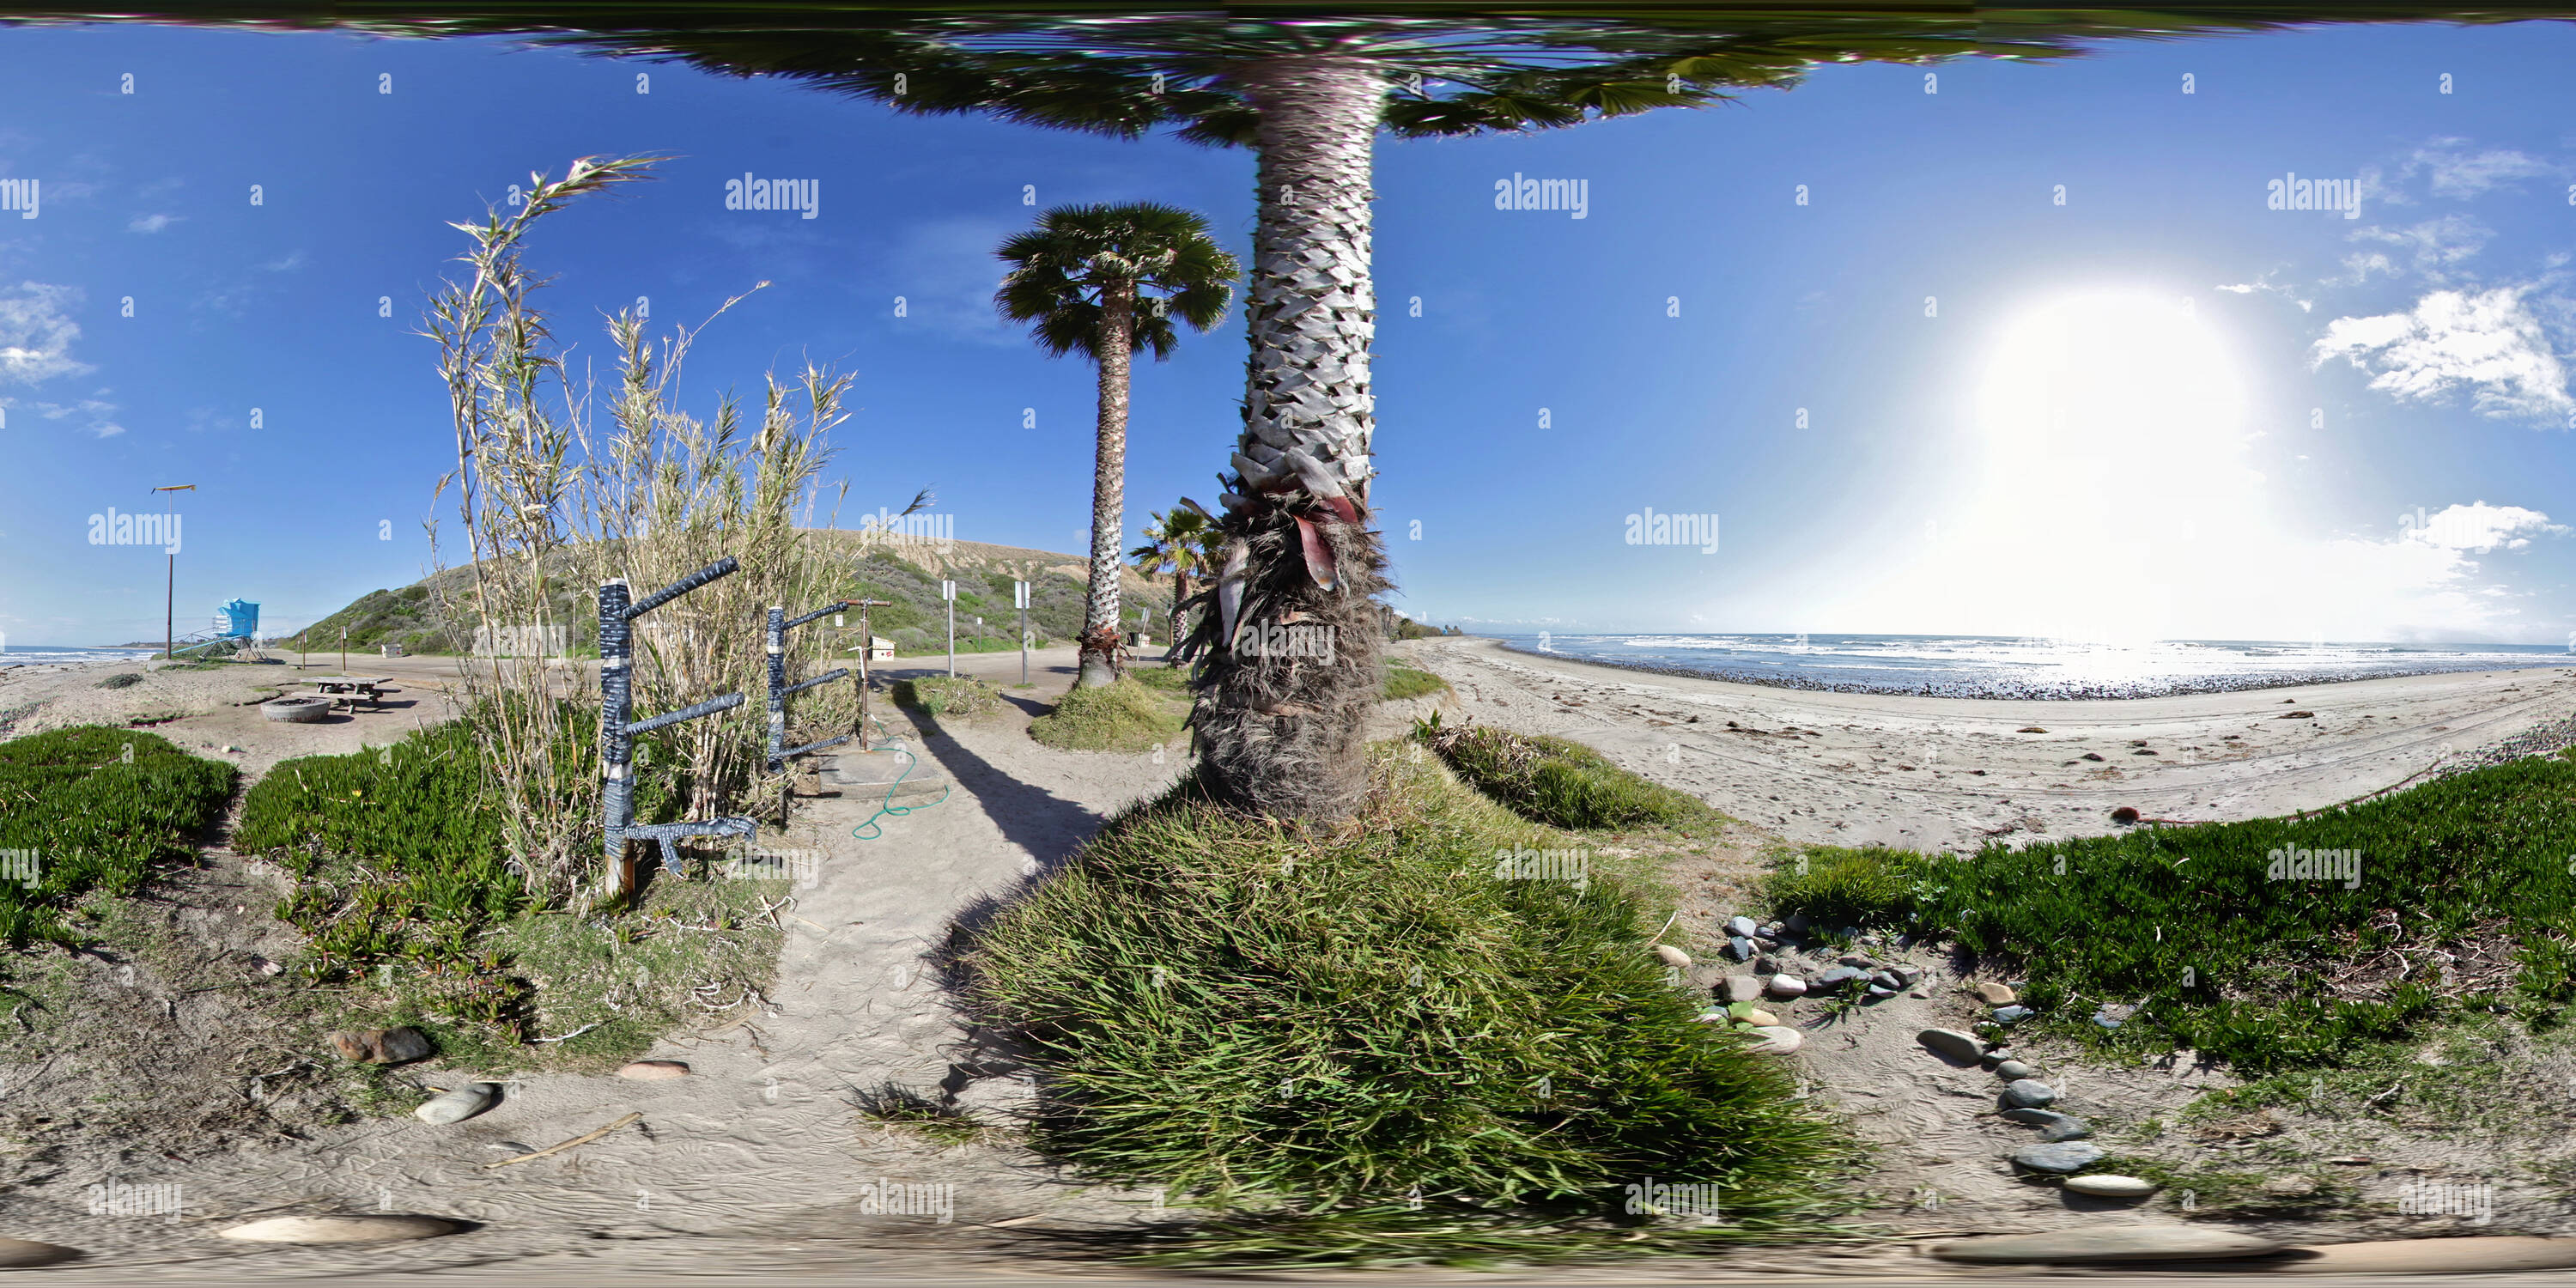 360 degree panoramic view of Old Mans Surf Beach, San Onofre Sate Beach, San Clemente